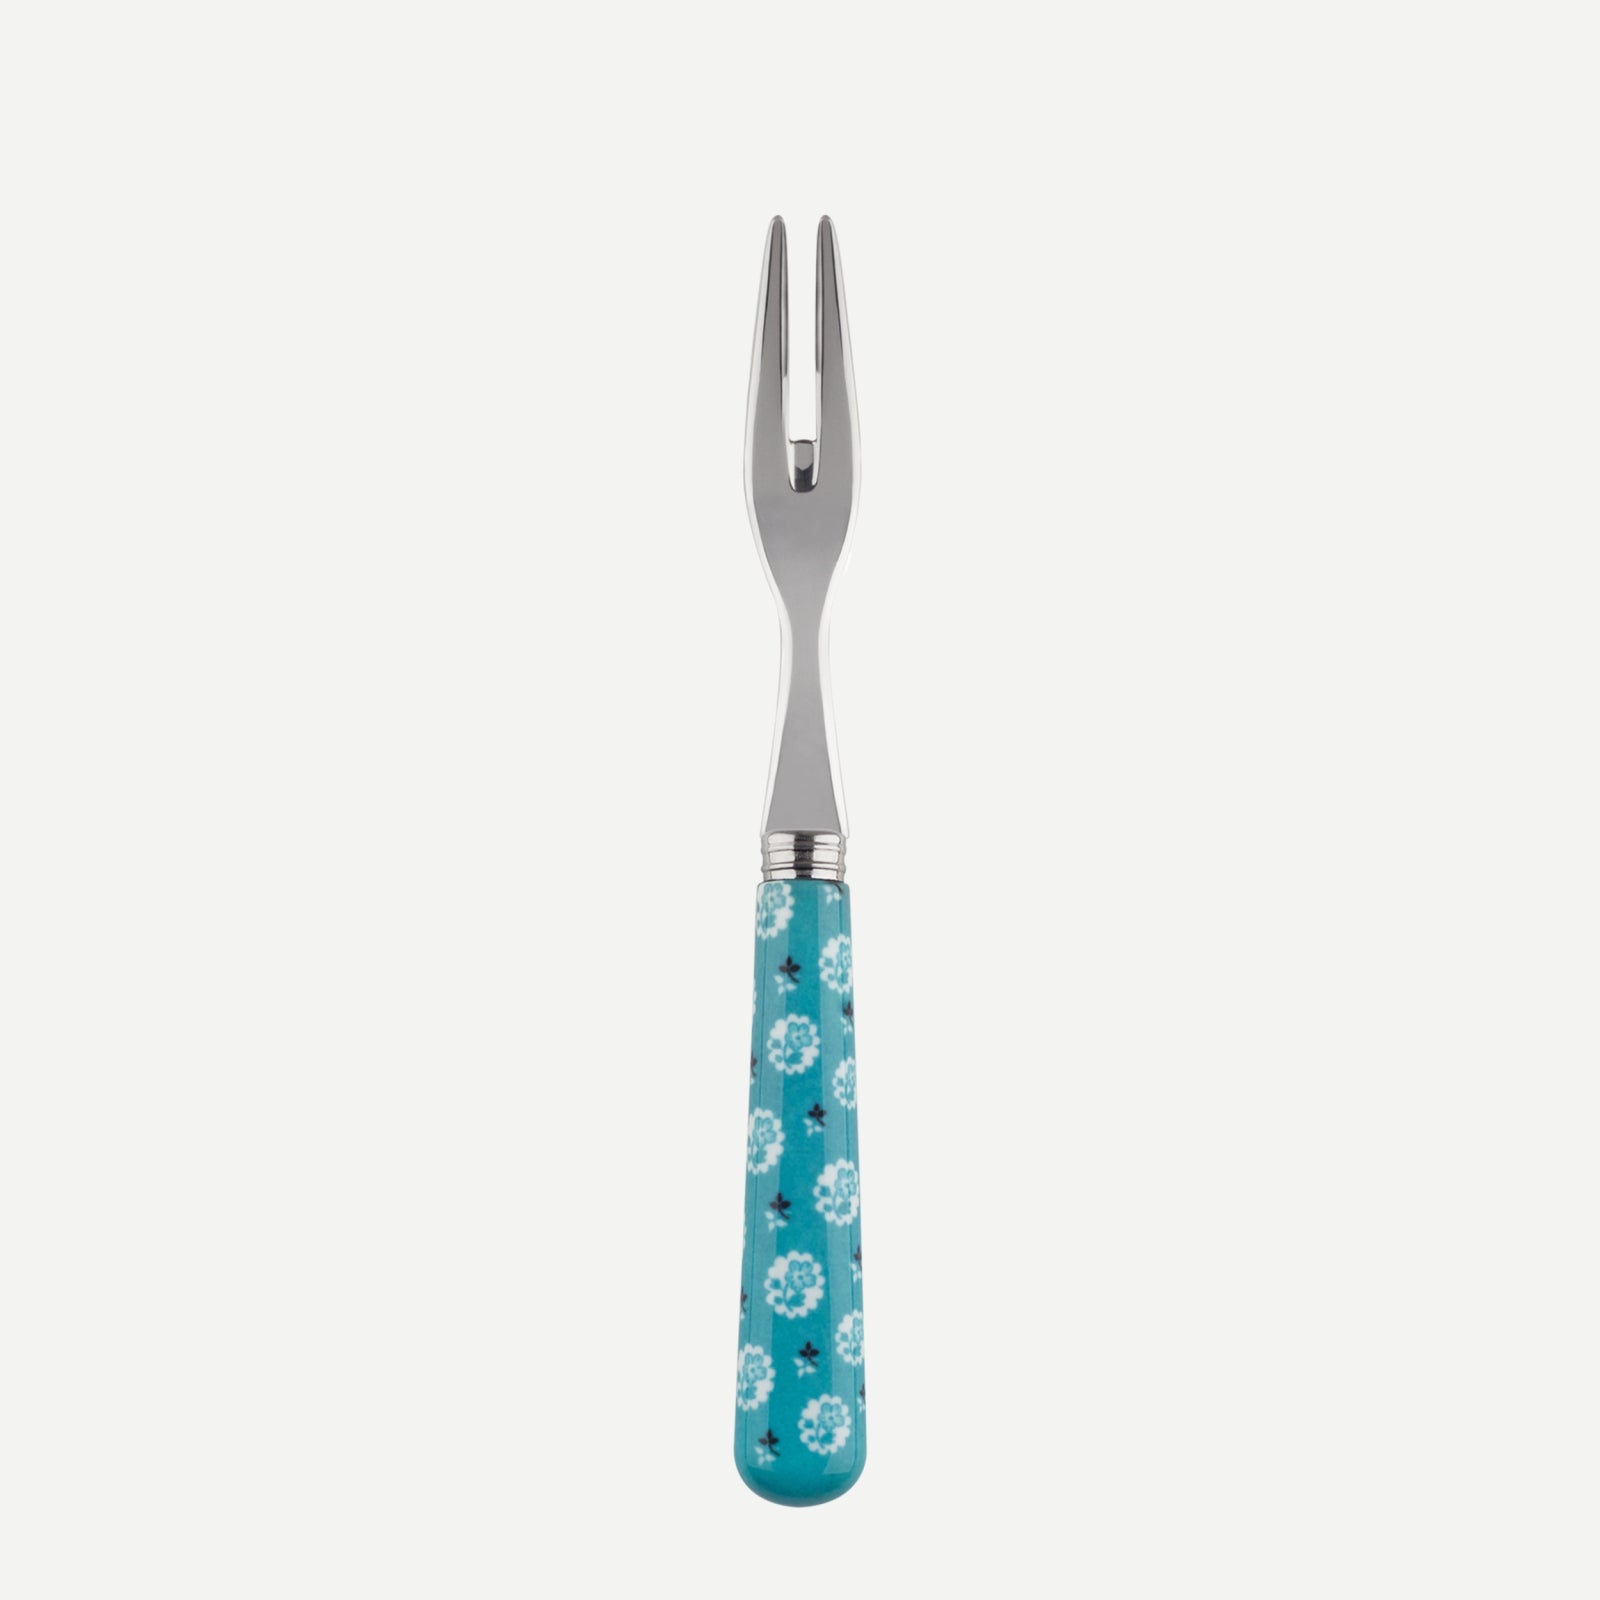 Cocktail fork - Provencal - Turquoise